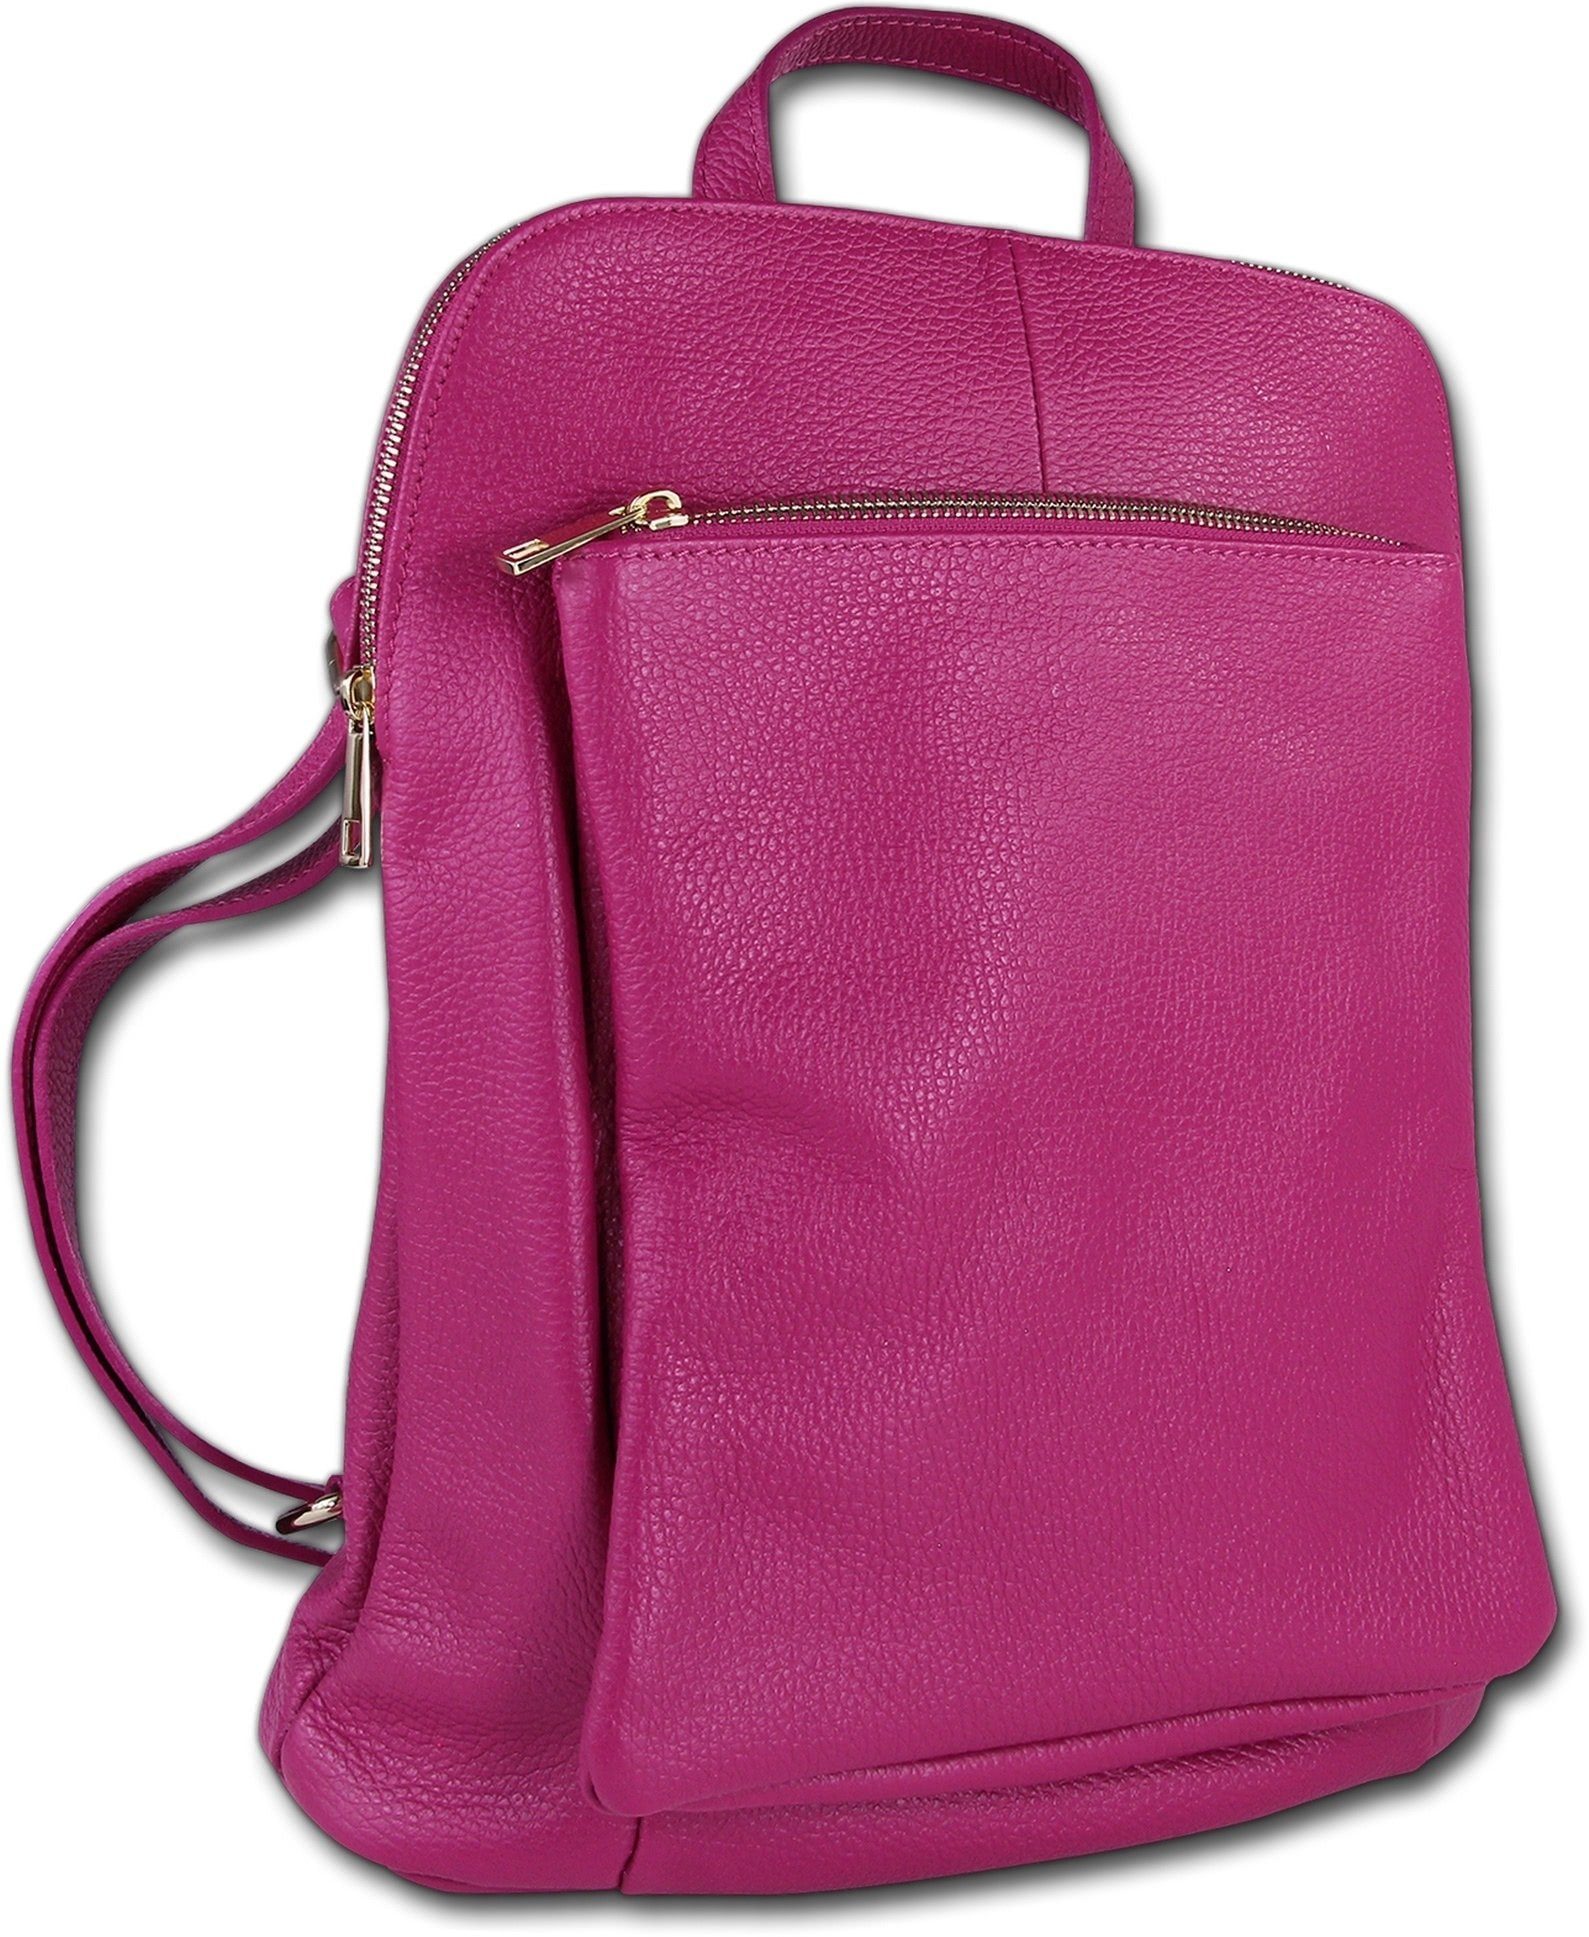 Toscanto Cityrucksack Toscanto Cityrucksack Freizeit (Cityrucksack, Cityrucksack), Damen Tasche Echtes Leder fuchsia, pink, Made-In Italy